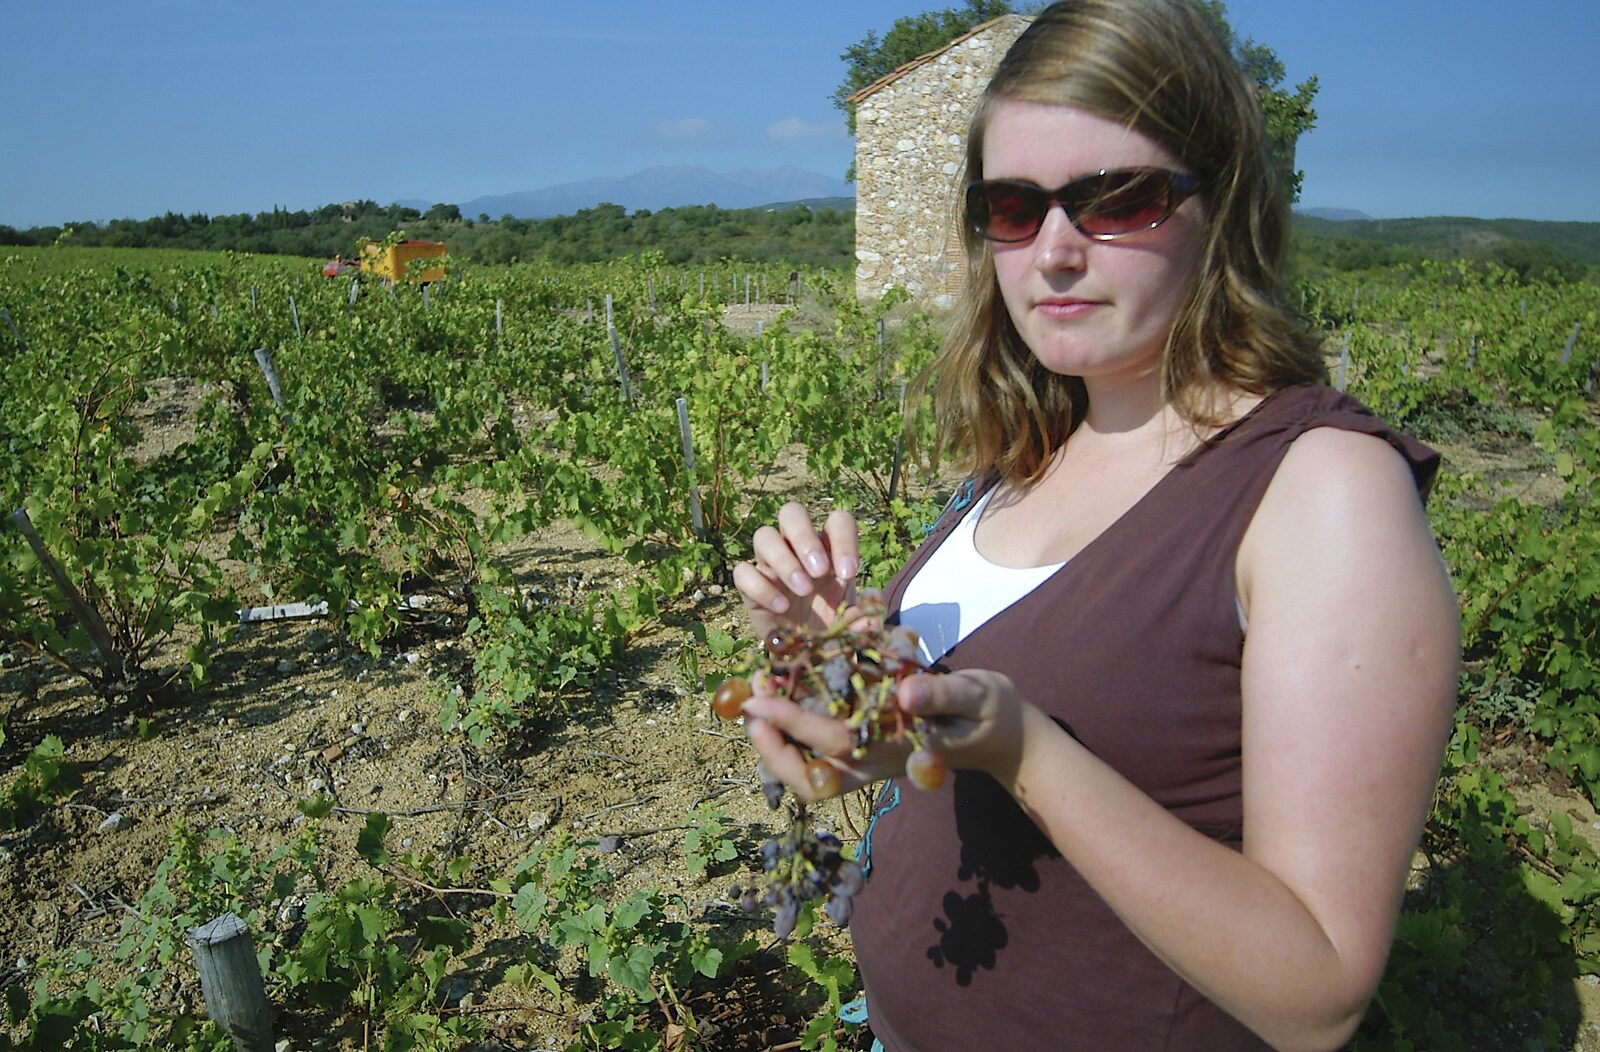 Isobel tries a grape from A Roussillon Farmhouse, Fourques, Perpignan, France - 17th September 2006